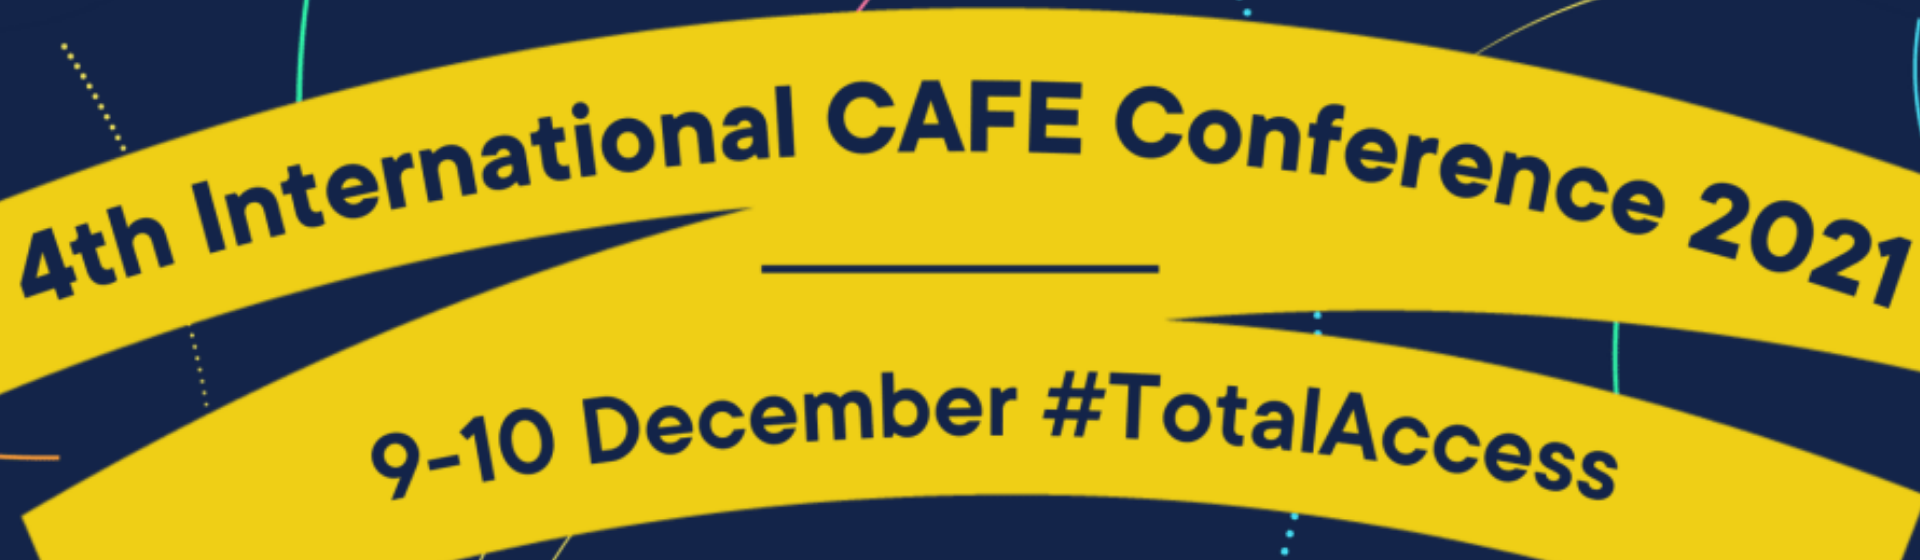 4th International CAFE Conference coming up! European Football for